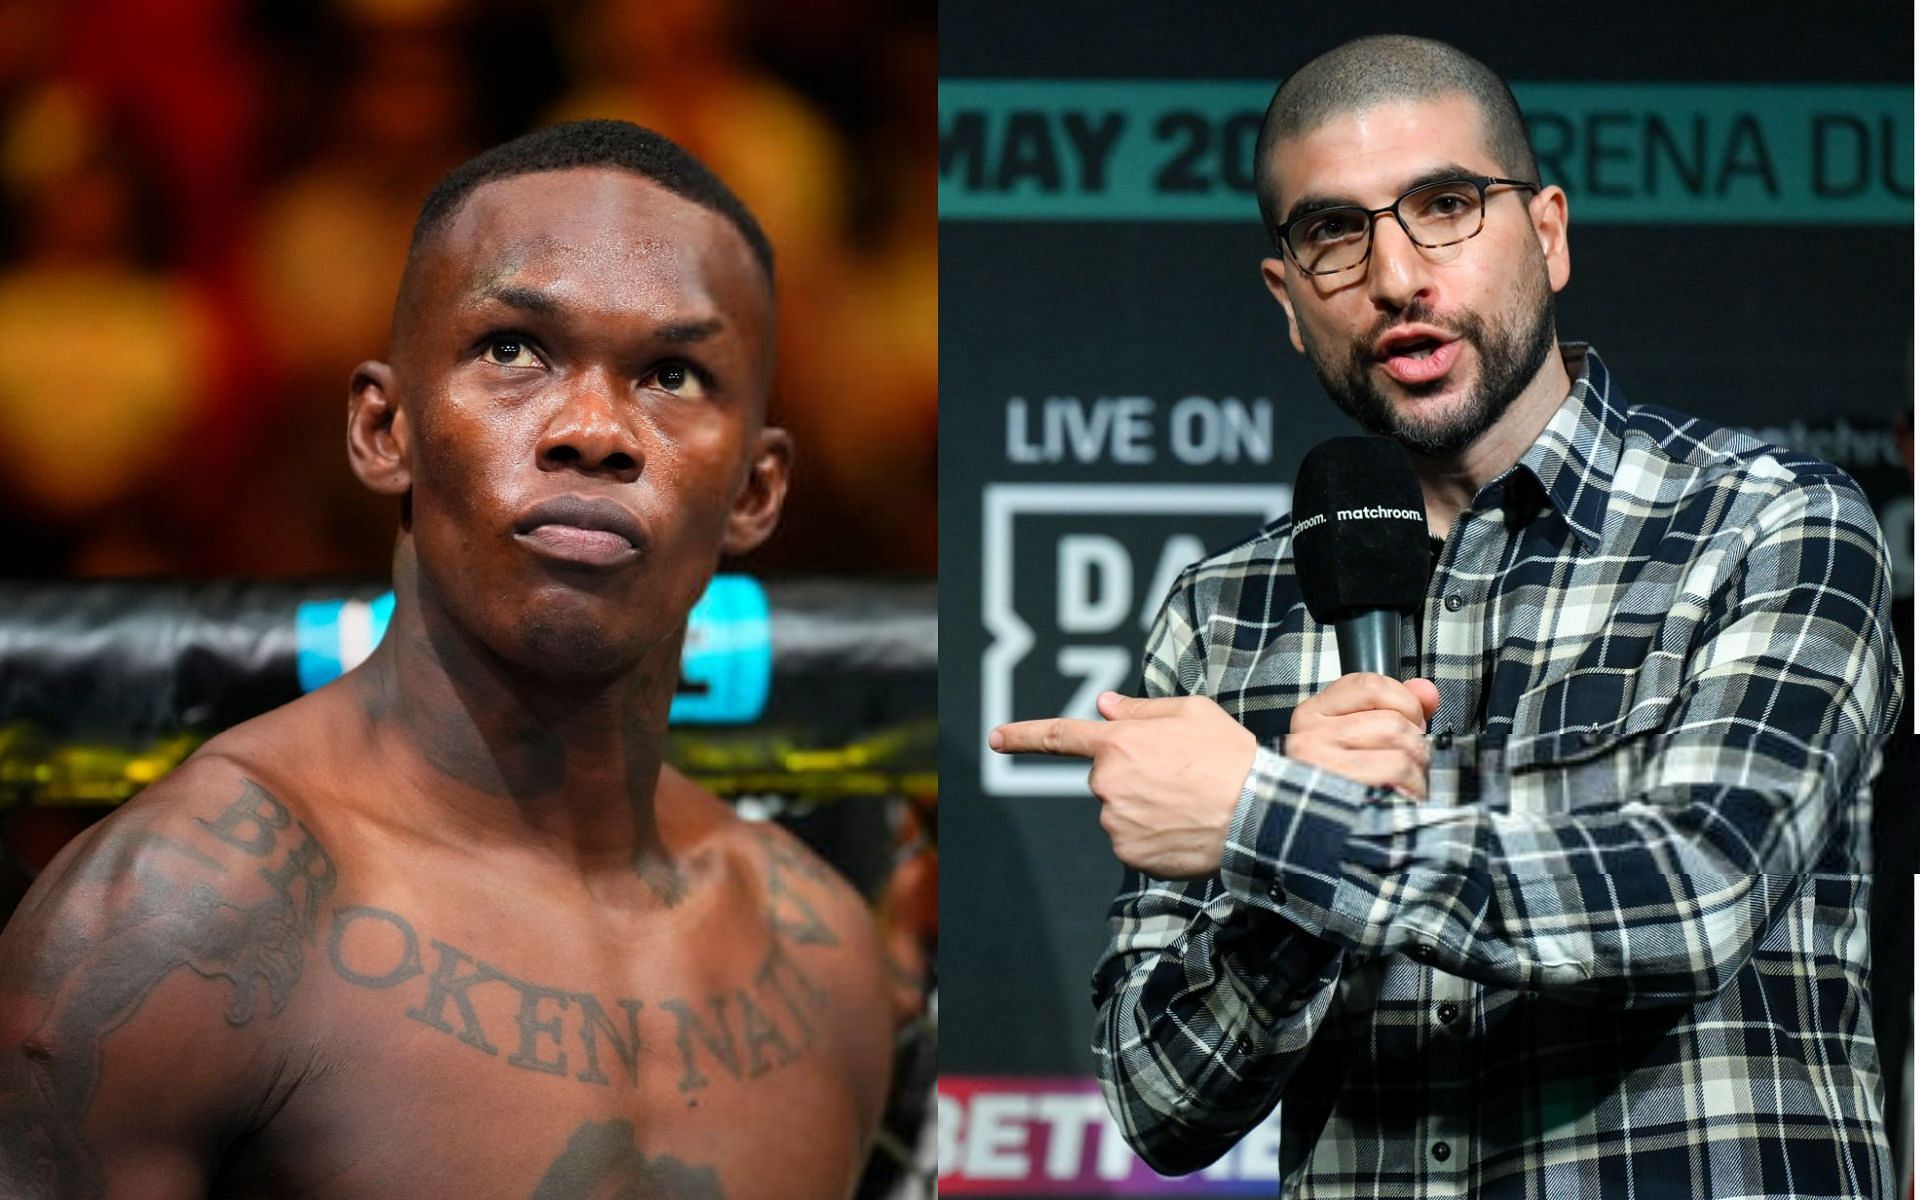 Israel Adesanya receives support from Ariel Helwani over UFC judging controversy